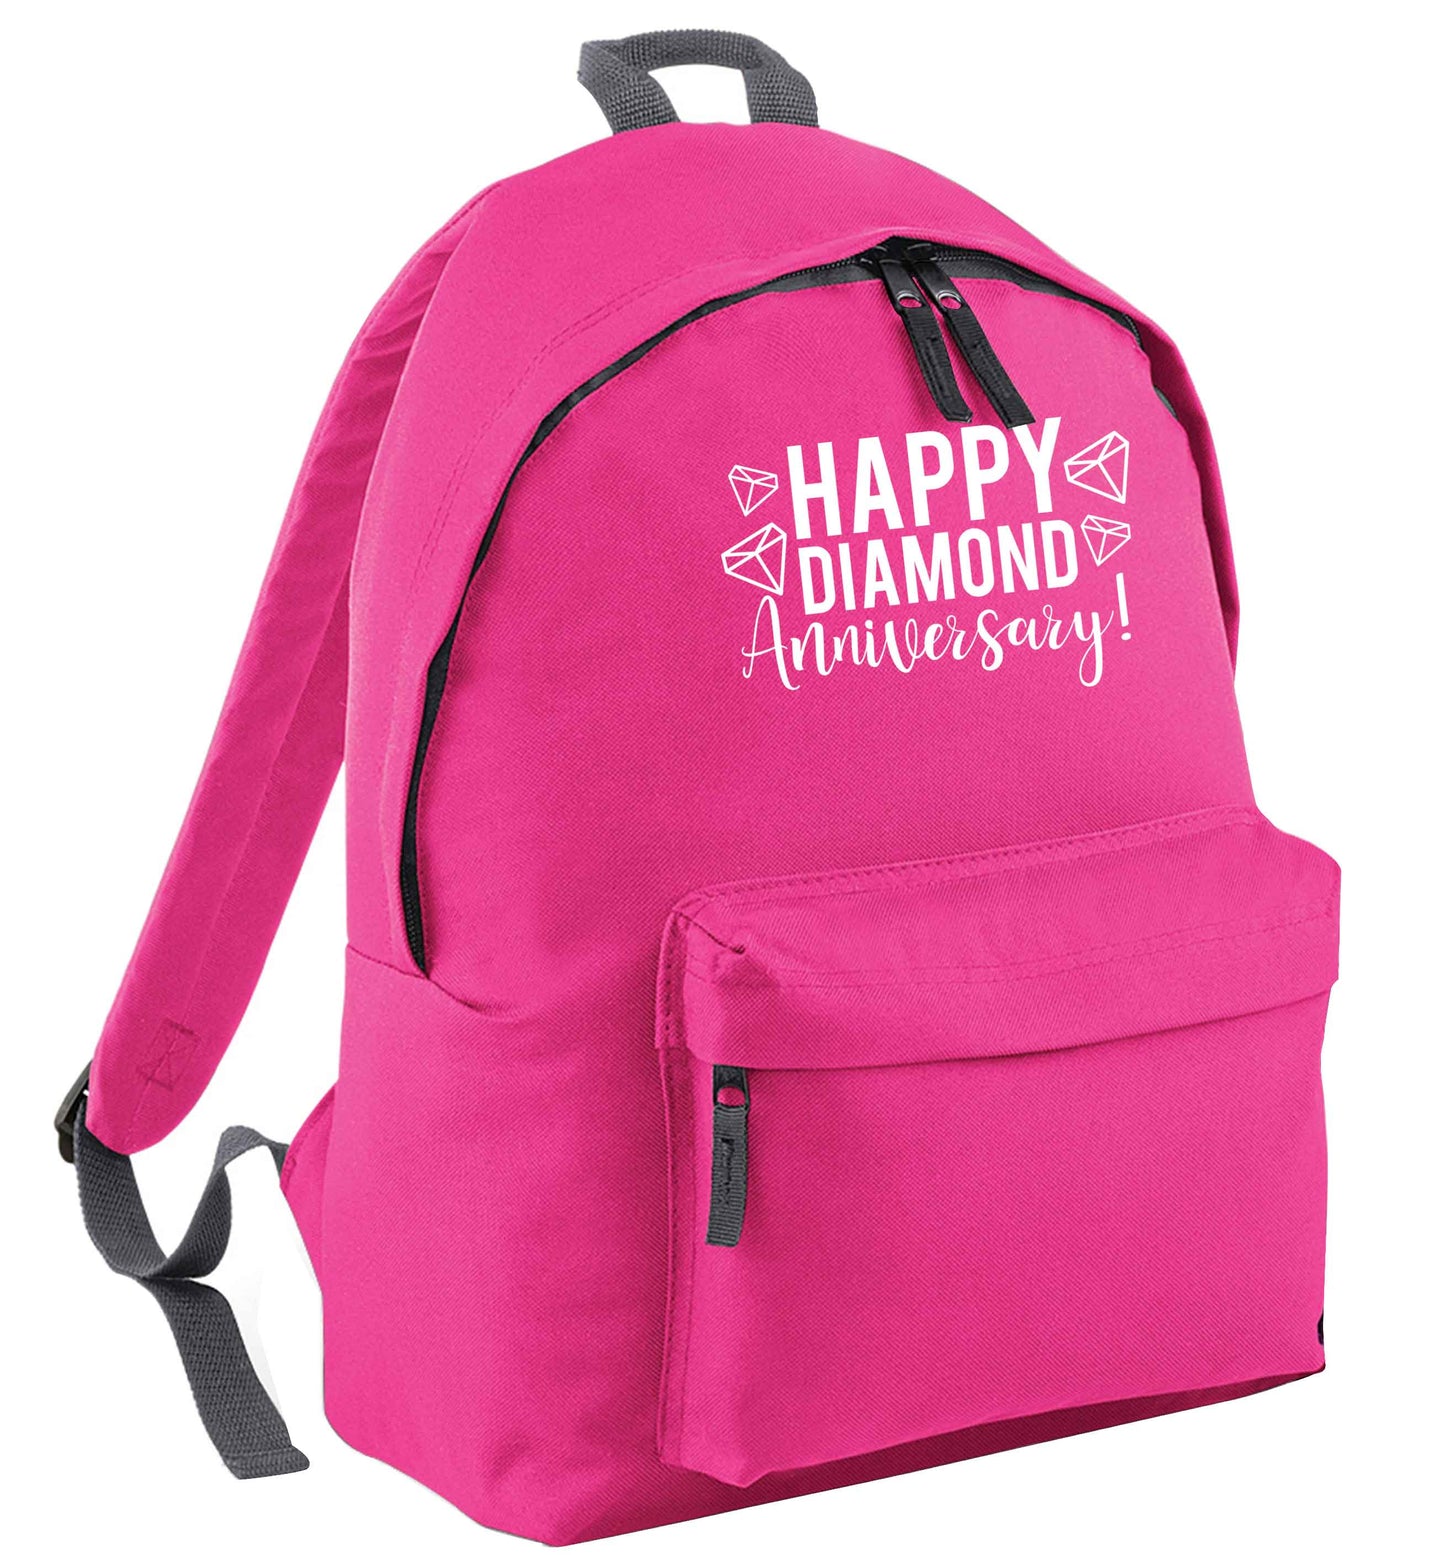 Happy diamond anniversary! pink adults backpack